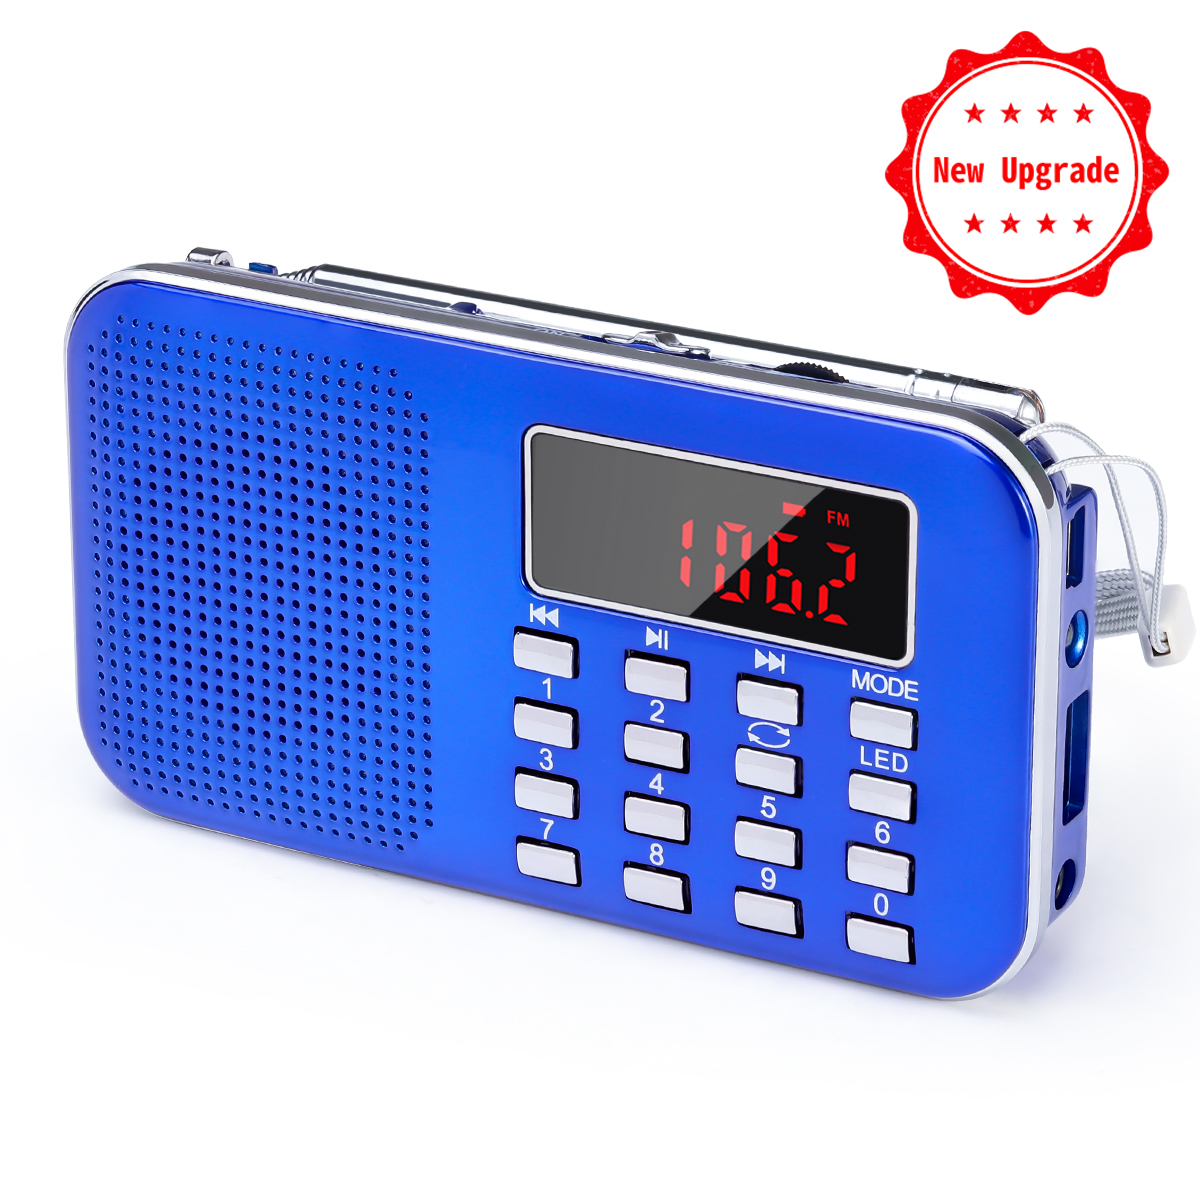 3000 Rechargeable Battery Alarm Clock NO AM Gold PRUNUS J-725C Portable Mini FM Radio Speaker Music Player USB Drive TF Card with LED Display 